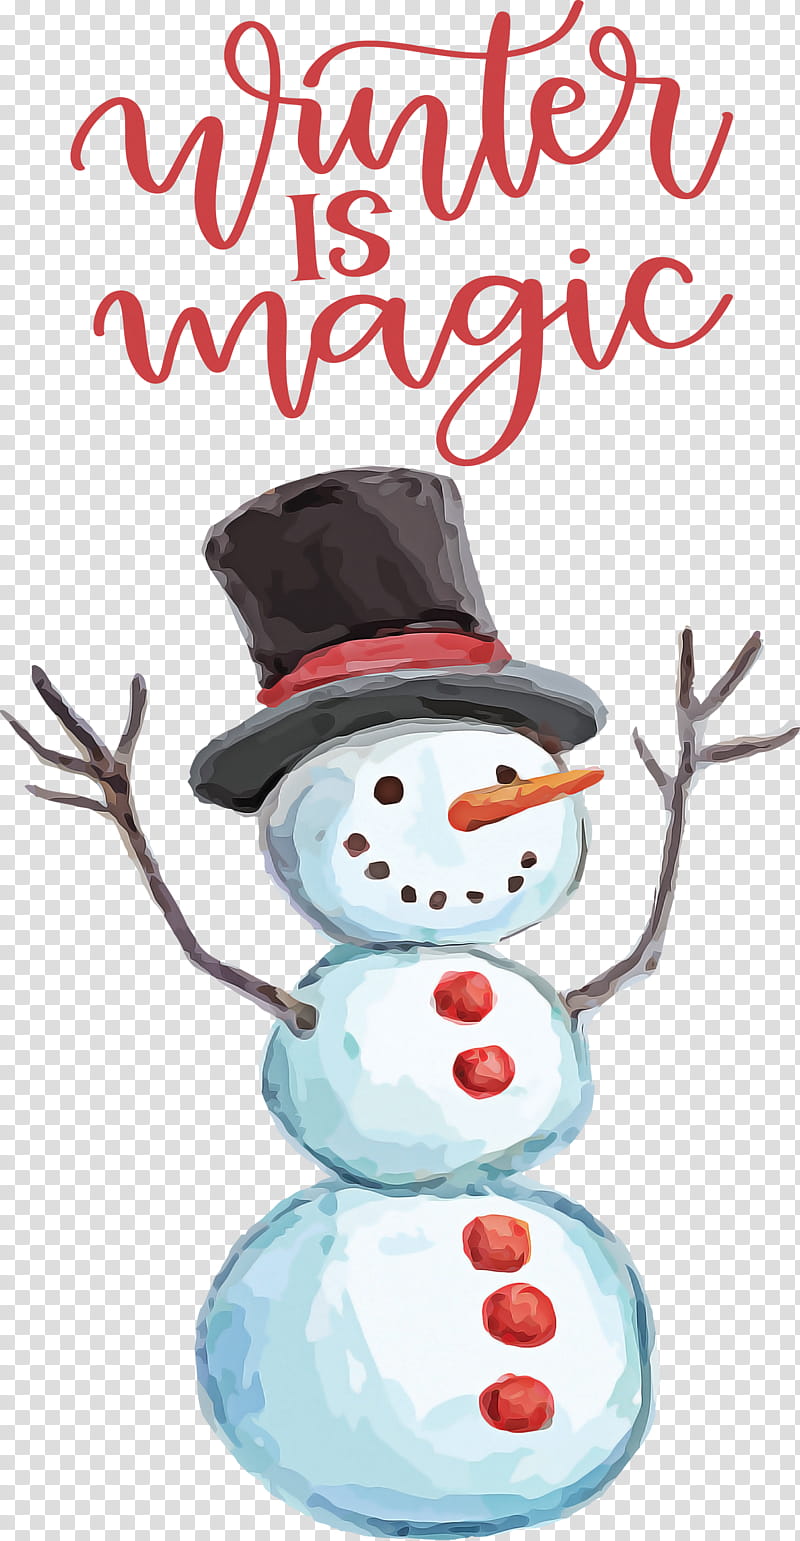 Winter Is Magic Hello Winter Winter, Winter
, Snowman, Christmas Day, Watercolor Painting, Santa Claus, Cartoon, Drawing transparent background PNG clipart